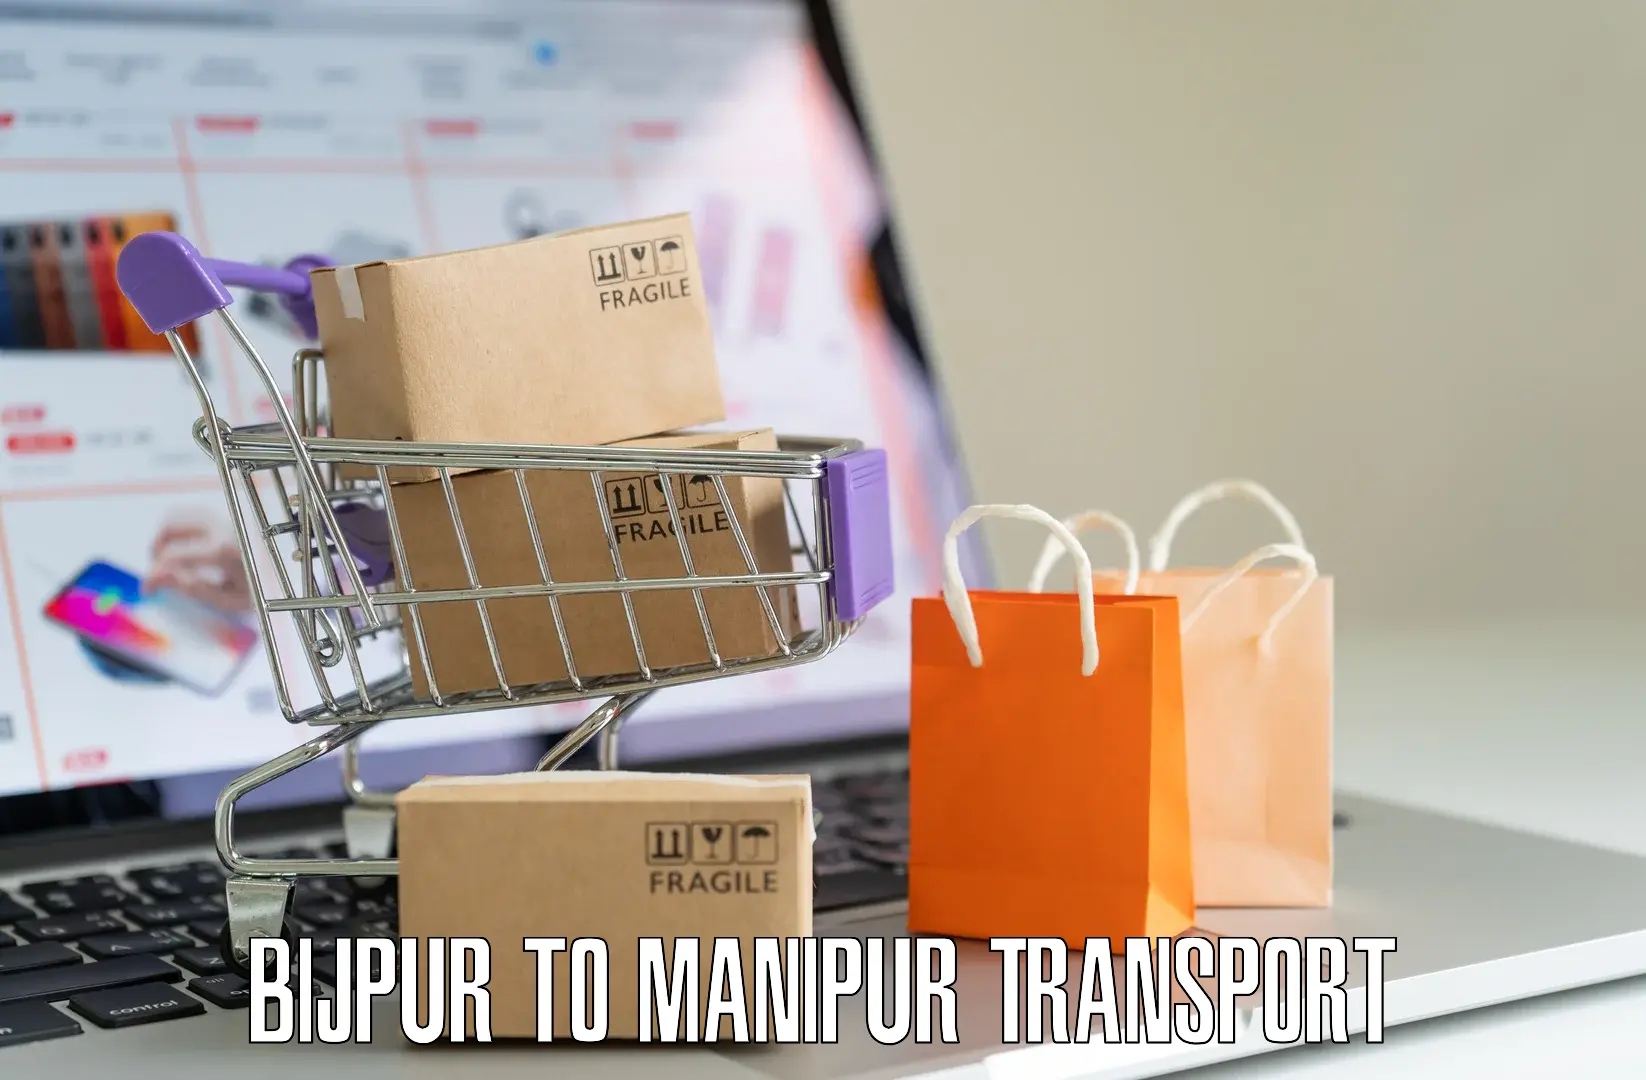 Daily transport service Bijpur to Moirang